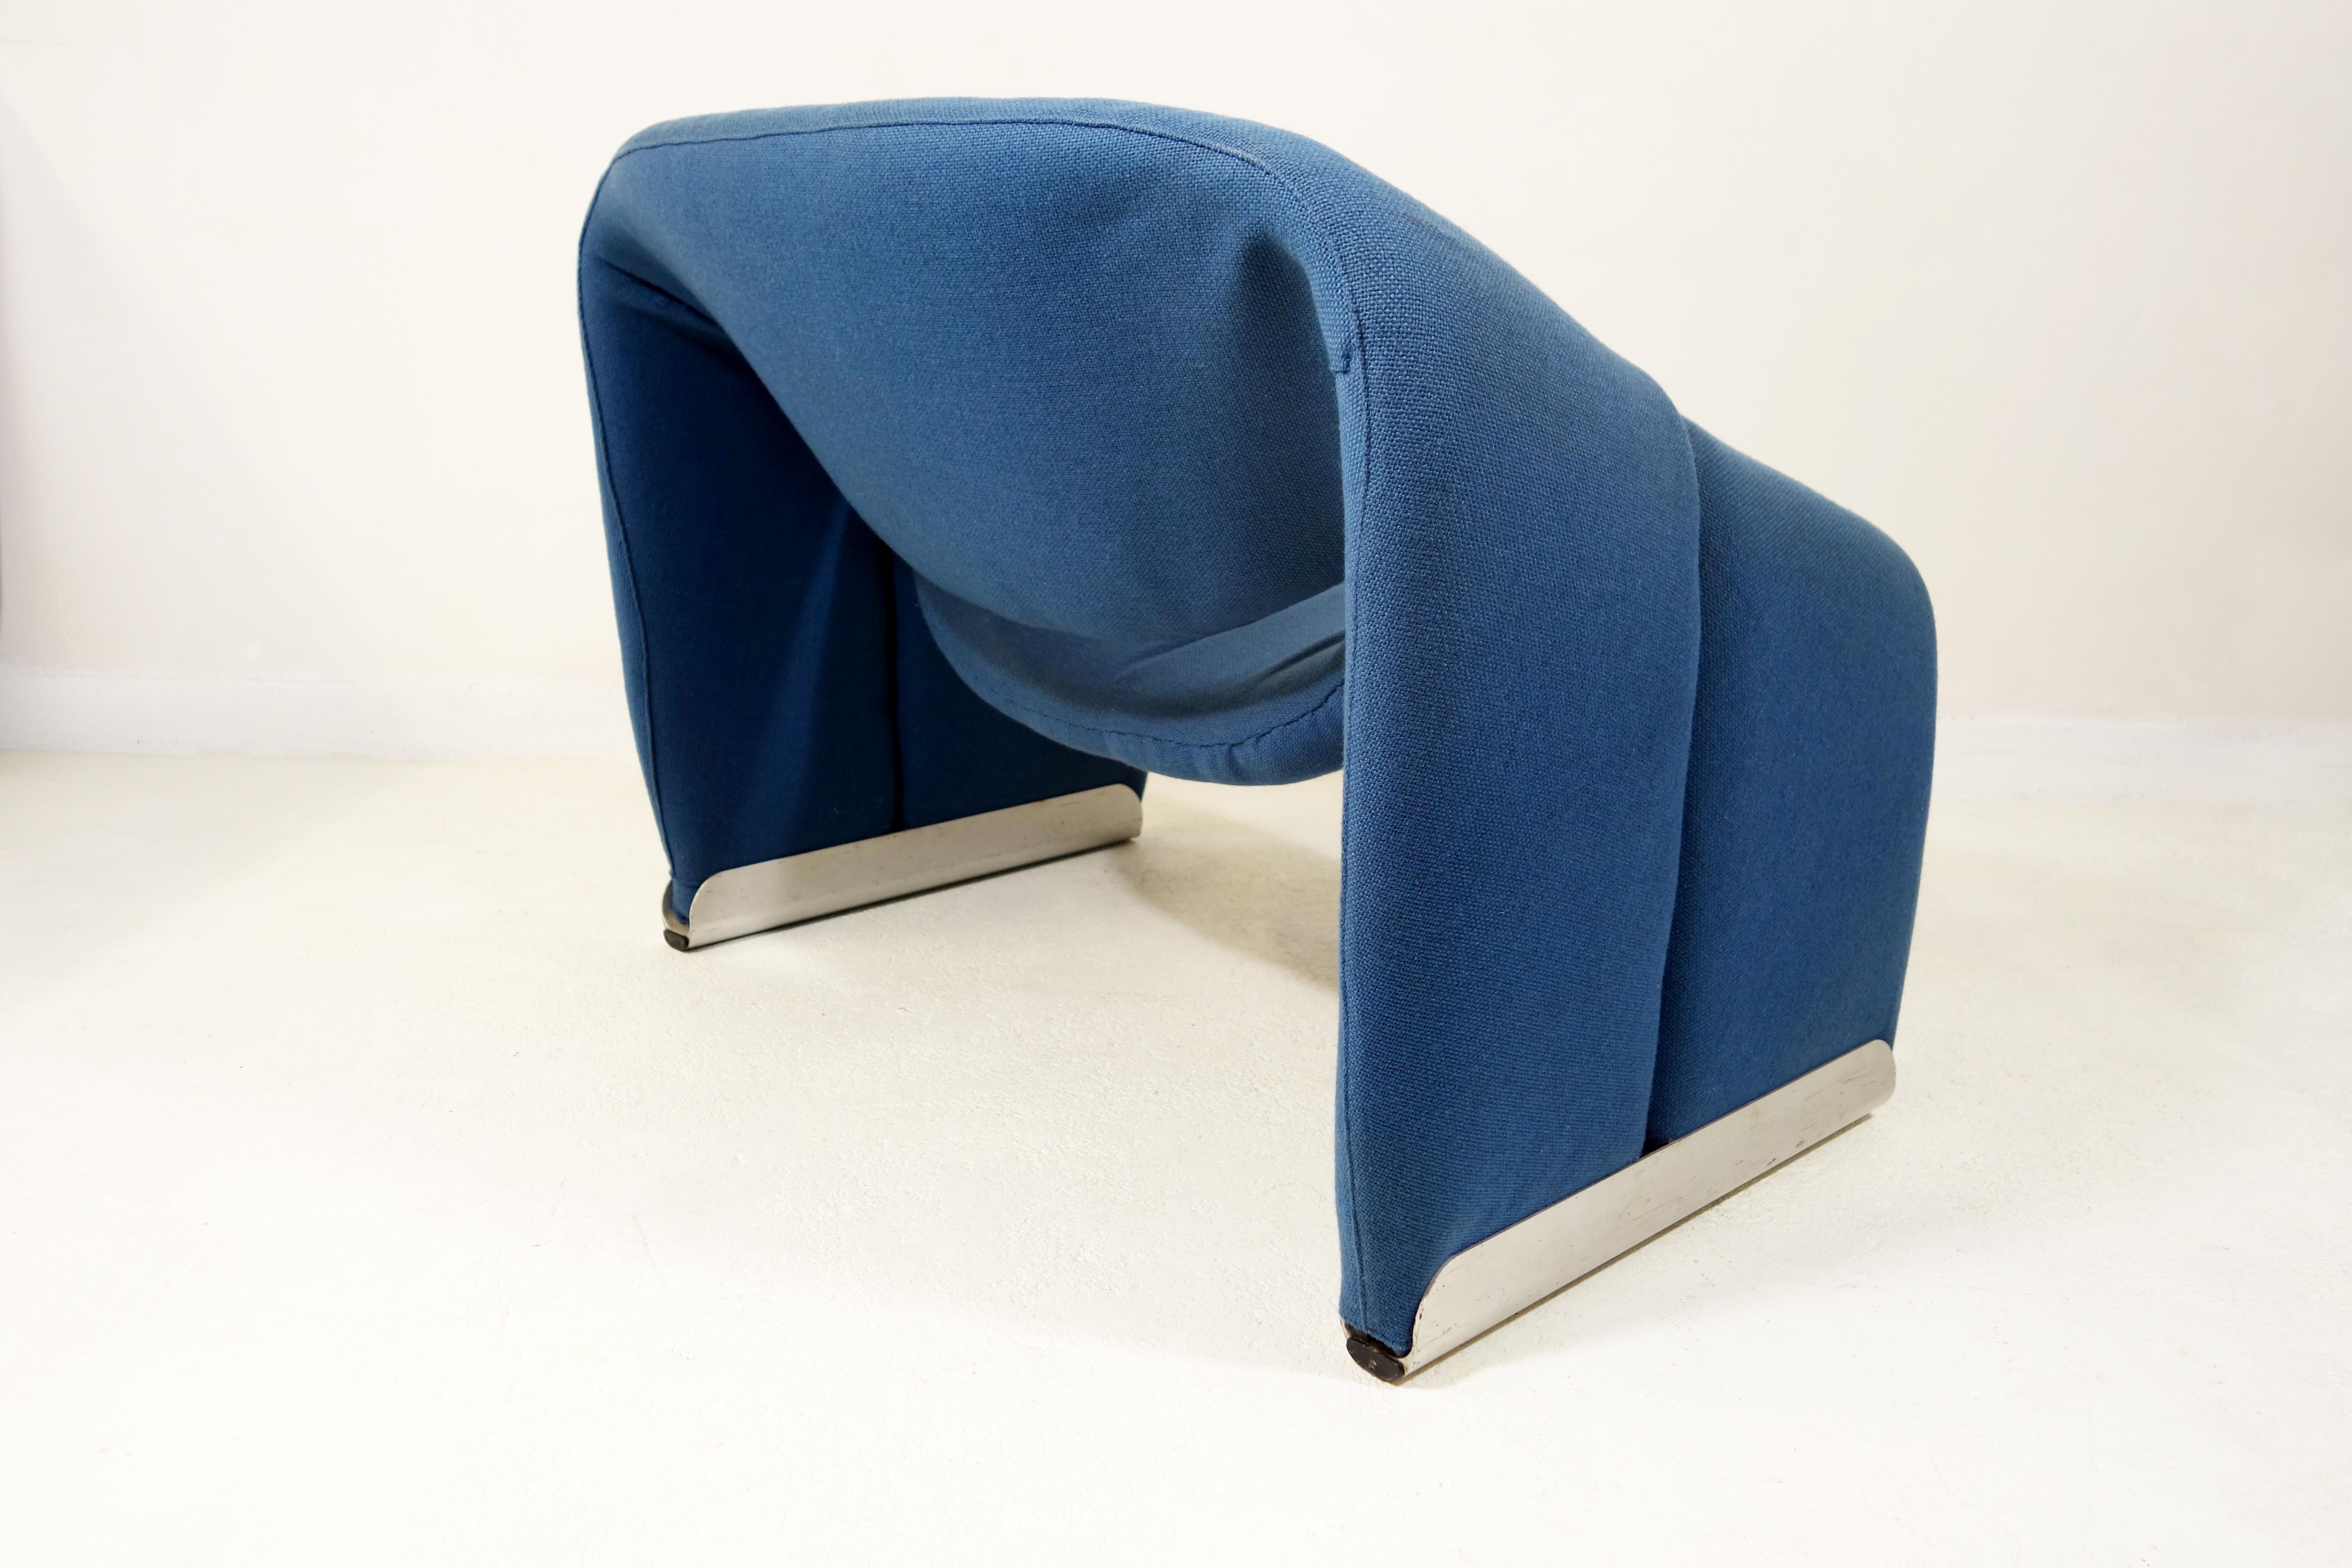 The Groovy chair, or F598, was designed in 1973 by France's top designer Pierre Paulin for Holland's most Avant Garde furniture maker Artifort. 

Their compactness combined with their great comfort and of course their iconic looks makes this chair